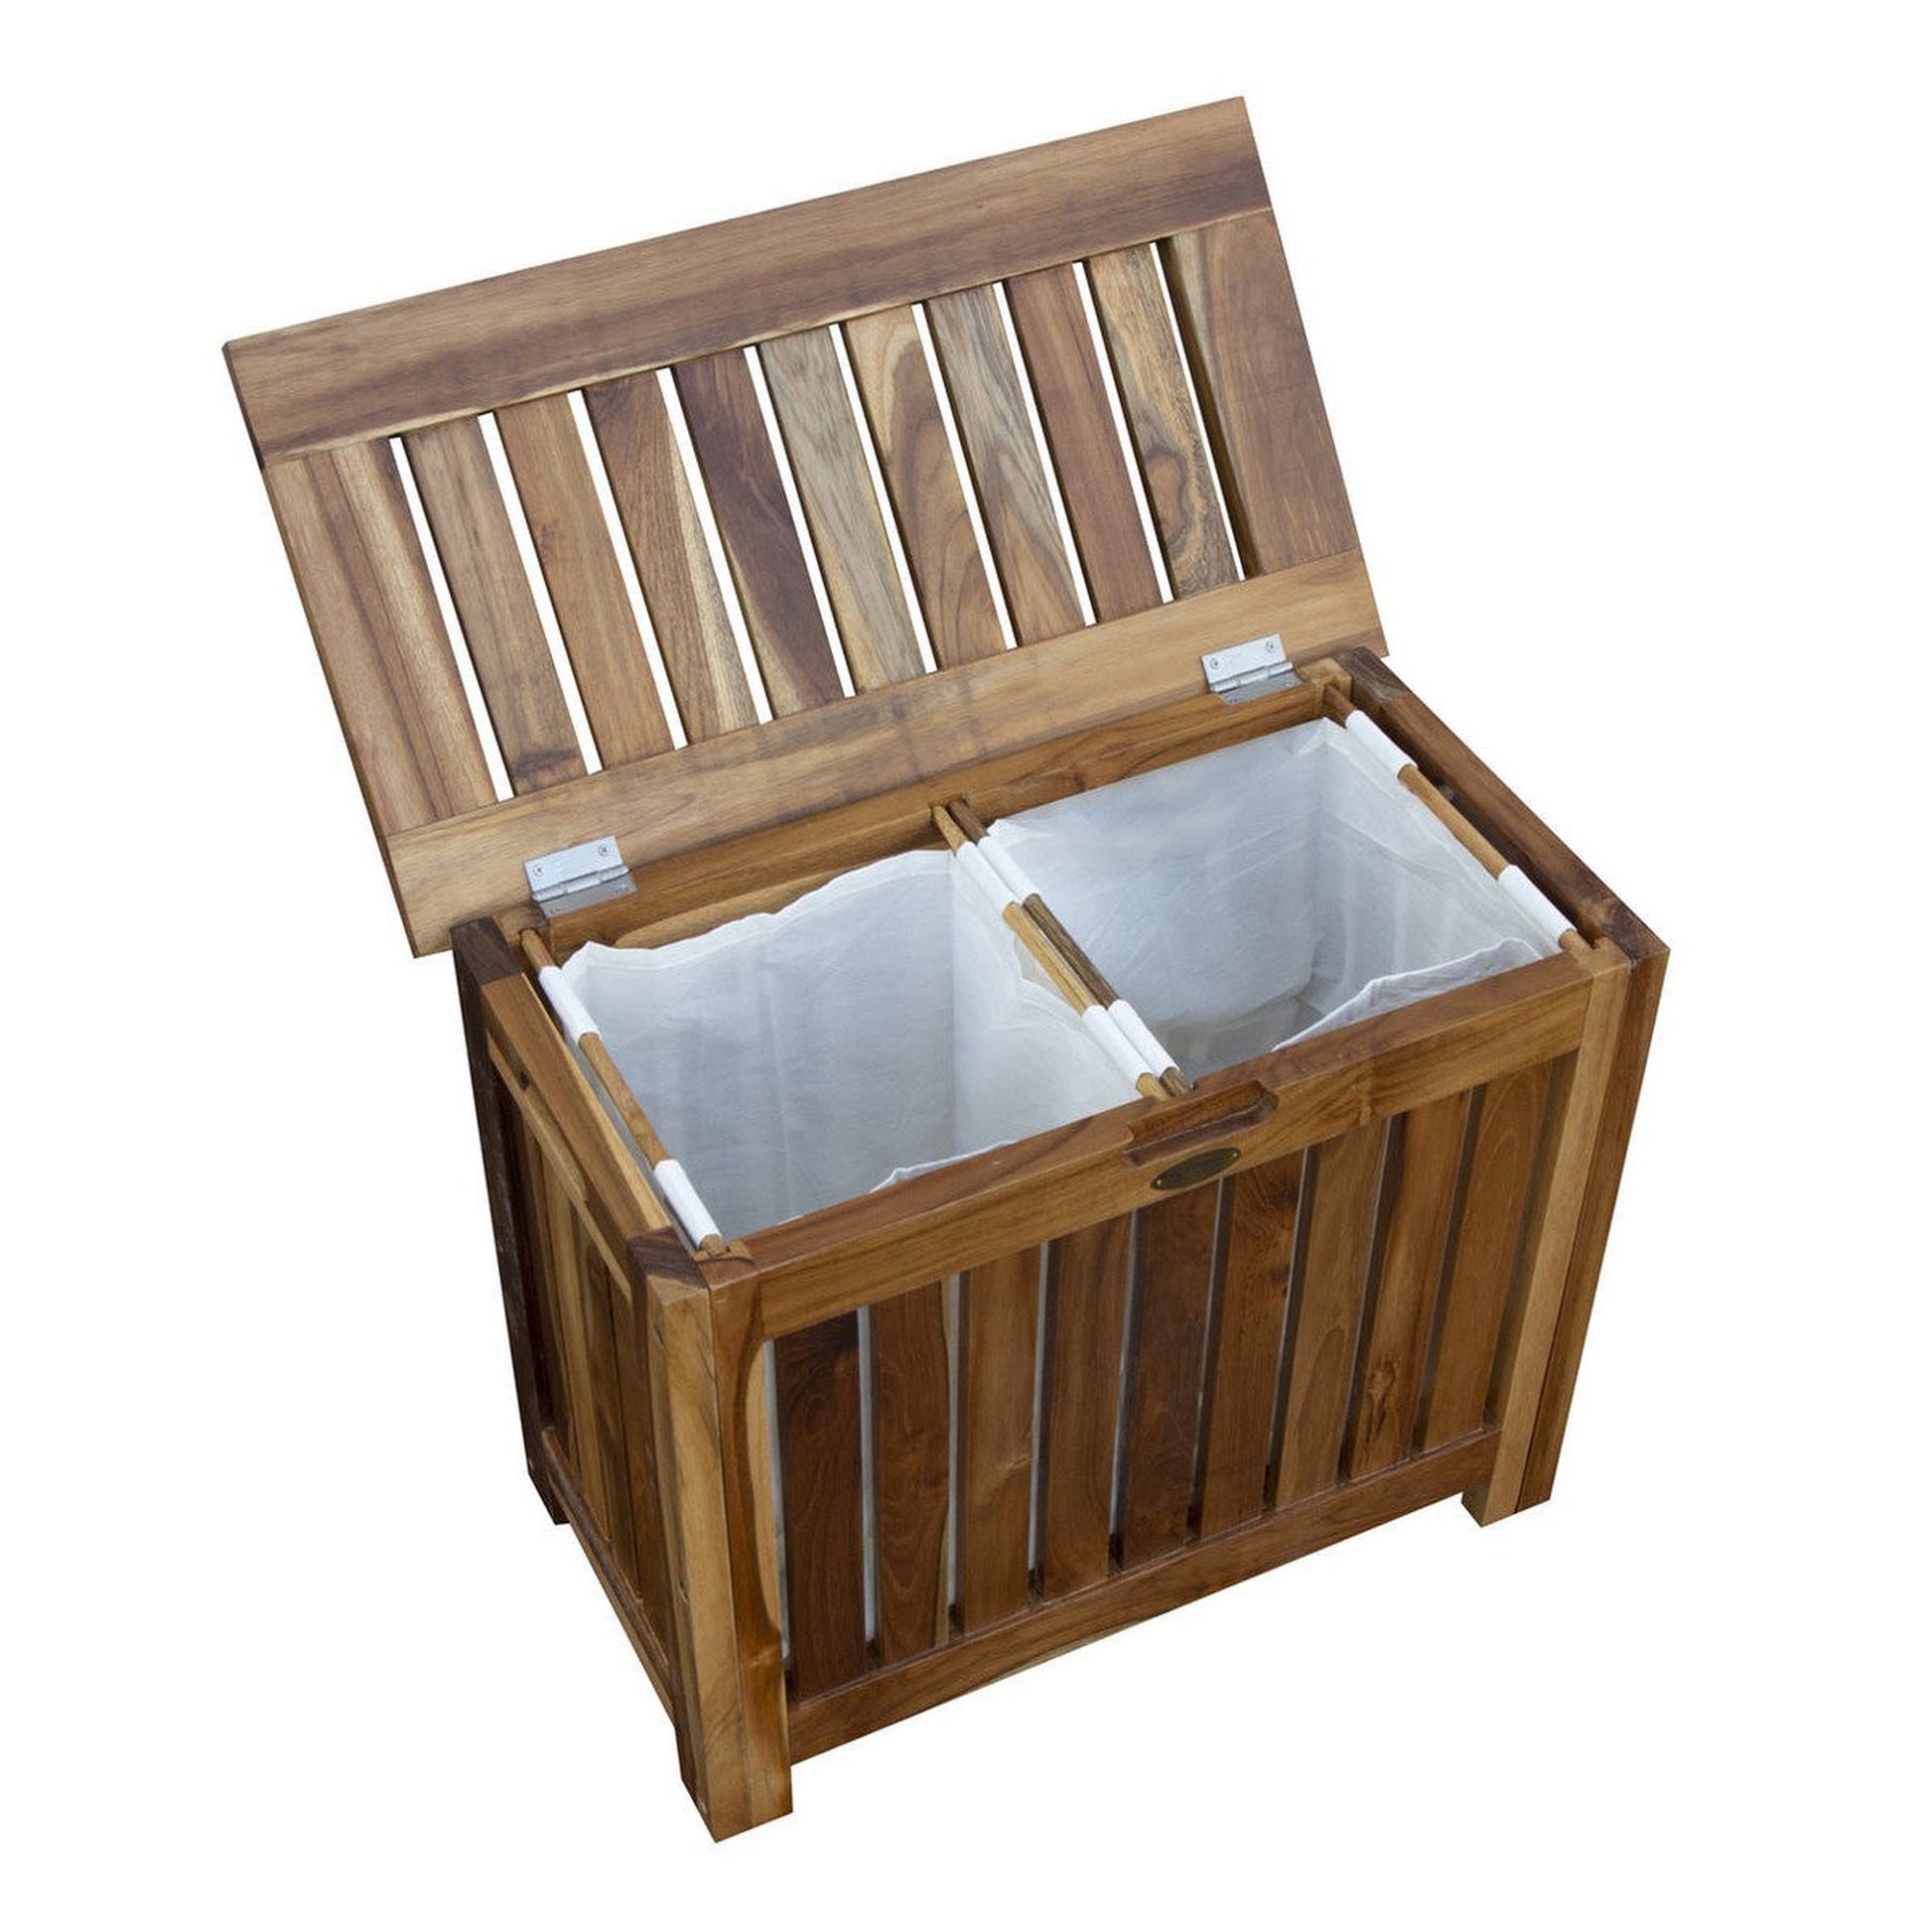 EcoDecors Eleganto 23" W x 19" H EarthyTeak Solid Teak Wood Double Laundry Storage Hamper With Removable Bags